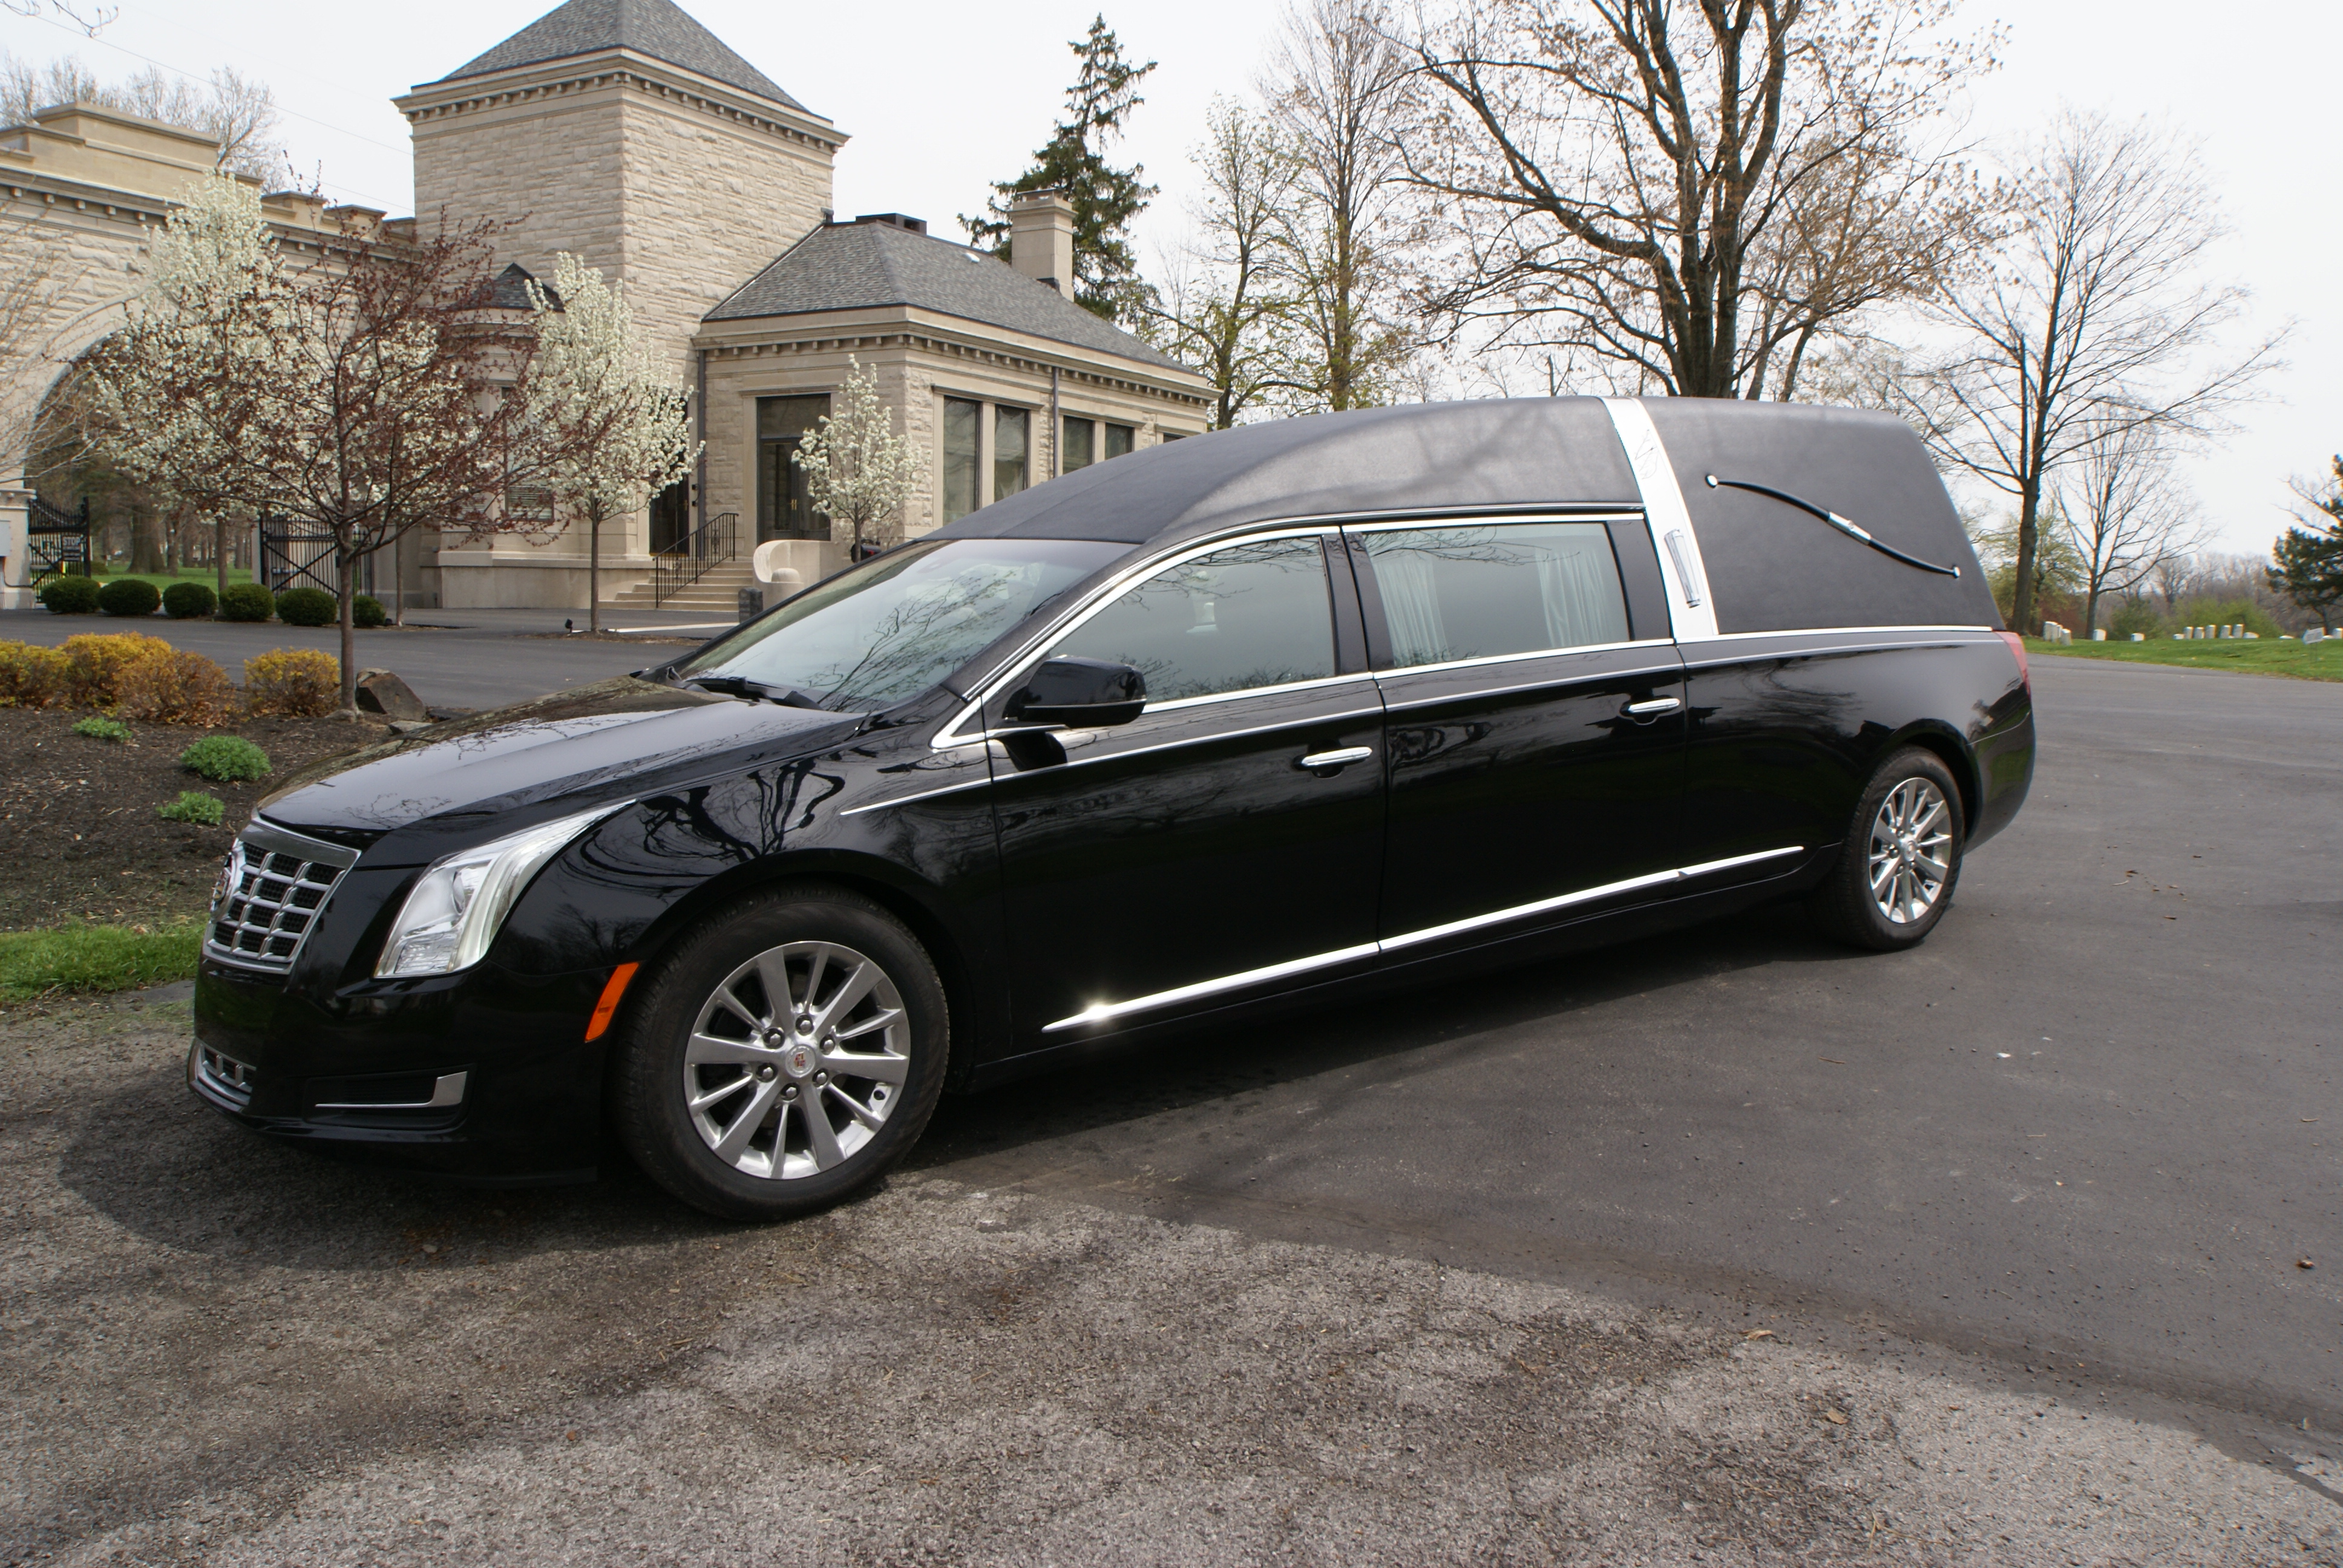 The S&S Coach Company Cadillac and Lincoln Funeral Vehicles.